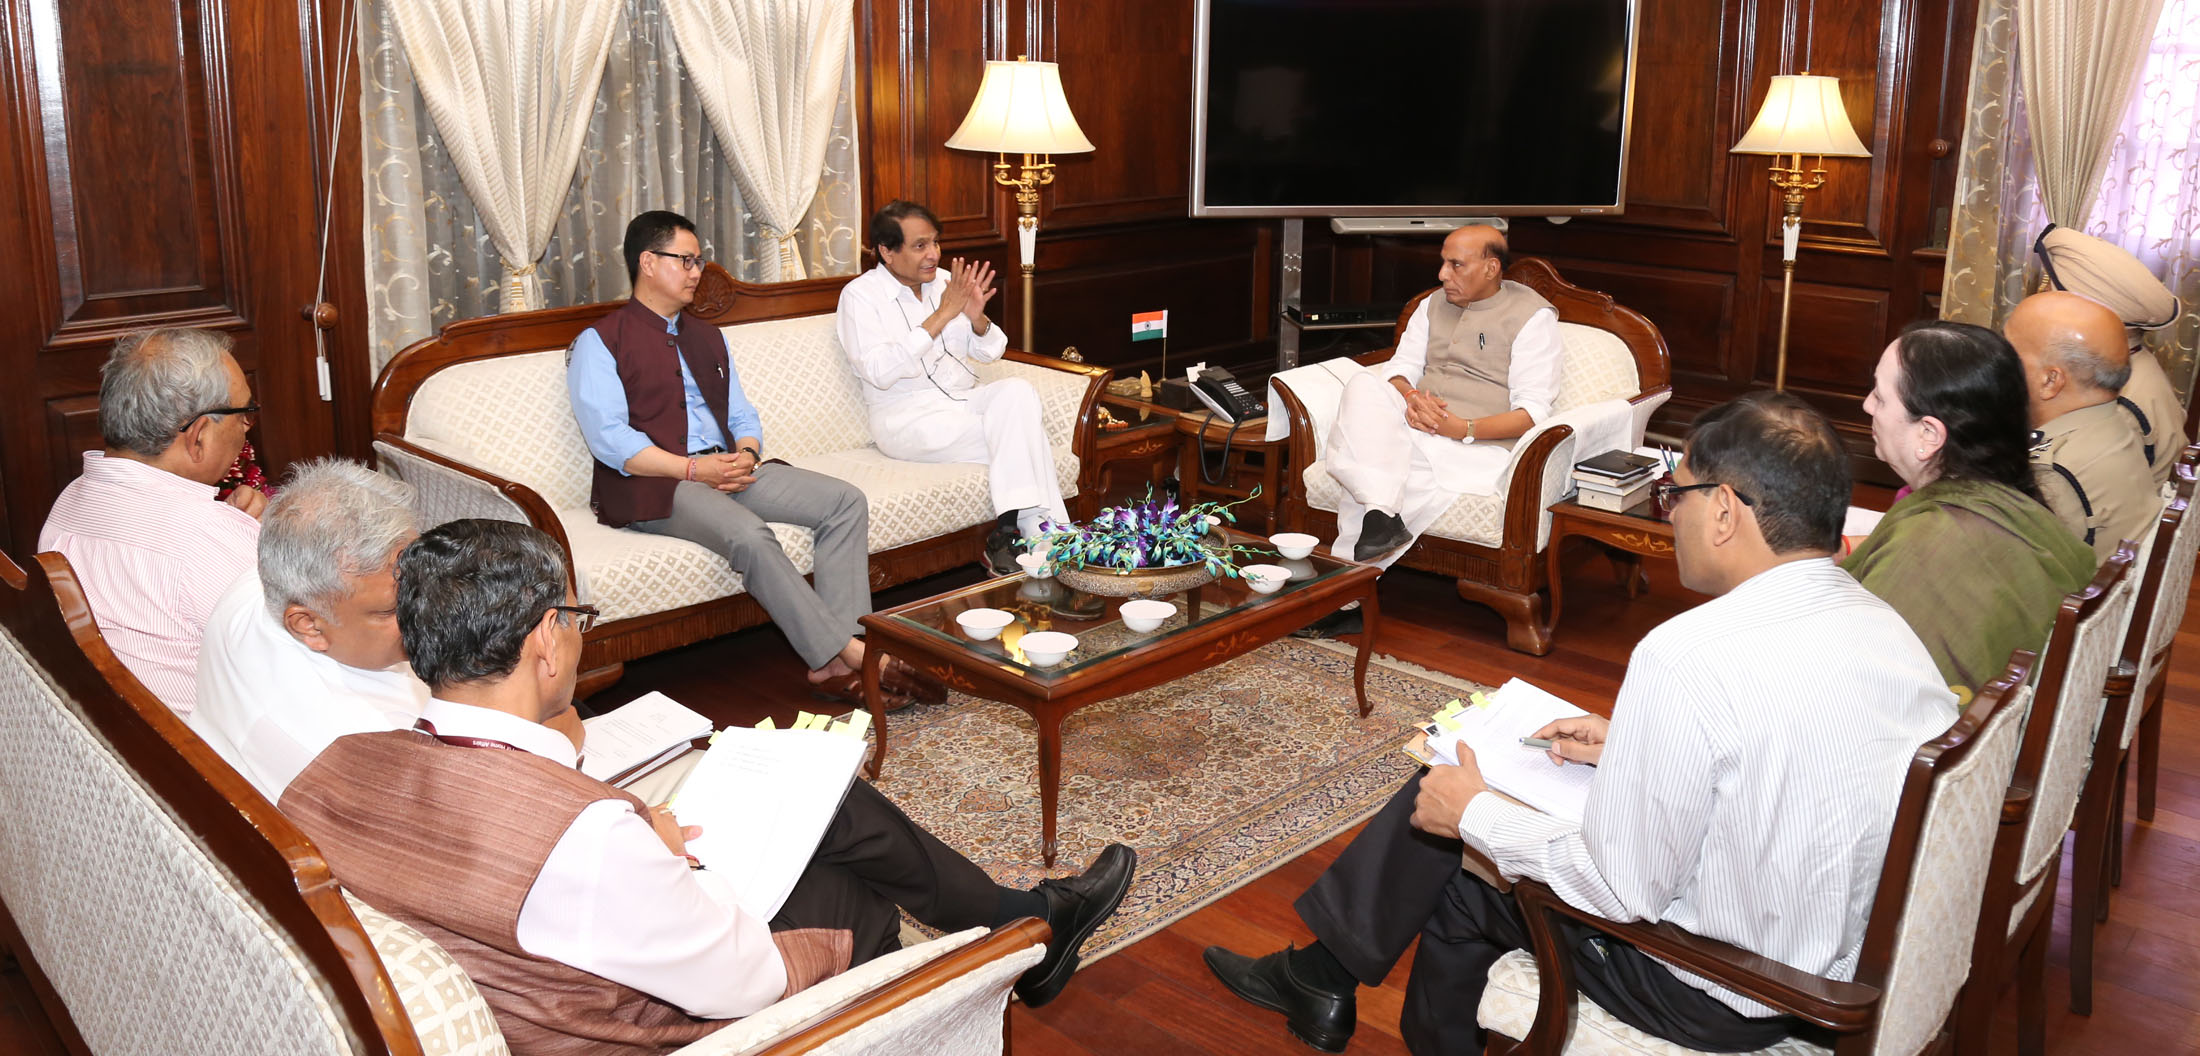 The Union Minister for Railways, Shri Suresh Prabhakar Prabhu meeting the Union Home Minister, Shri Rajnath Singh, in New Delhi on March 27, 2017. 	The Minister of State for Home Affairs, Shri Kiren Rijiju and other senior officers of the Ministry of Home Affairs are also seen.